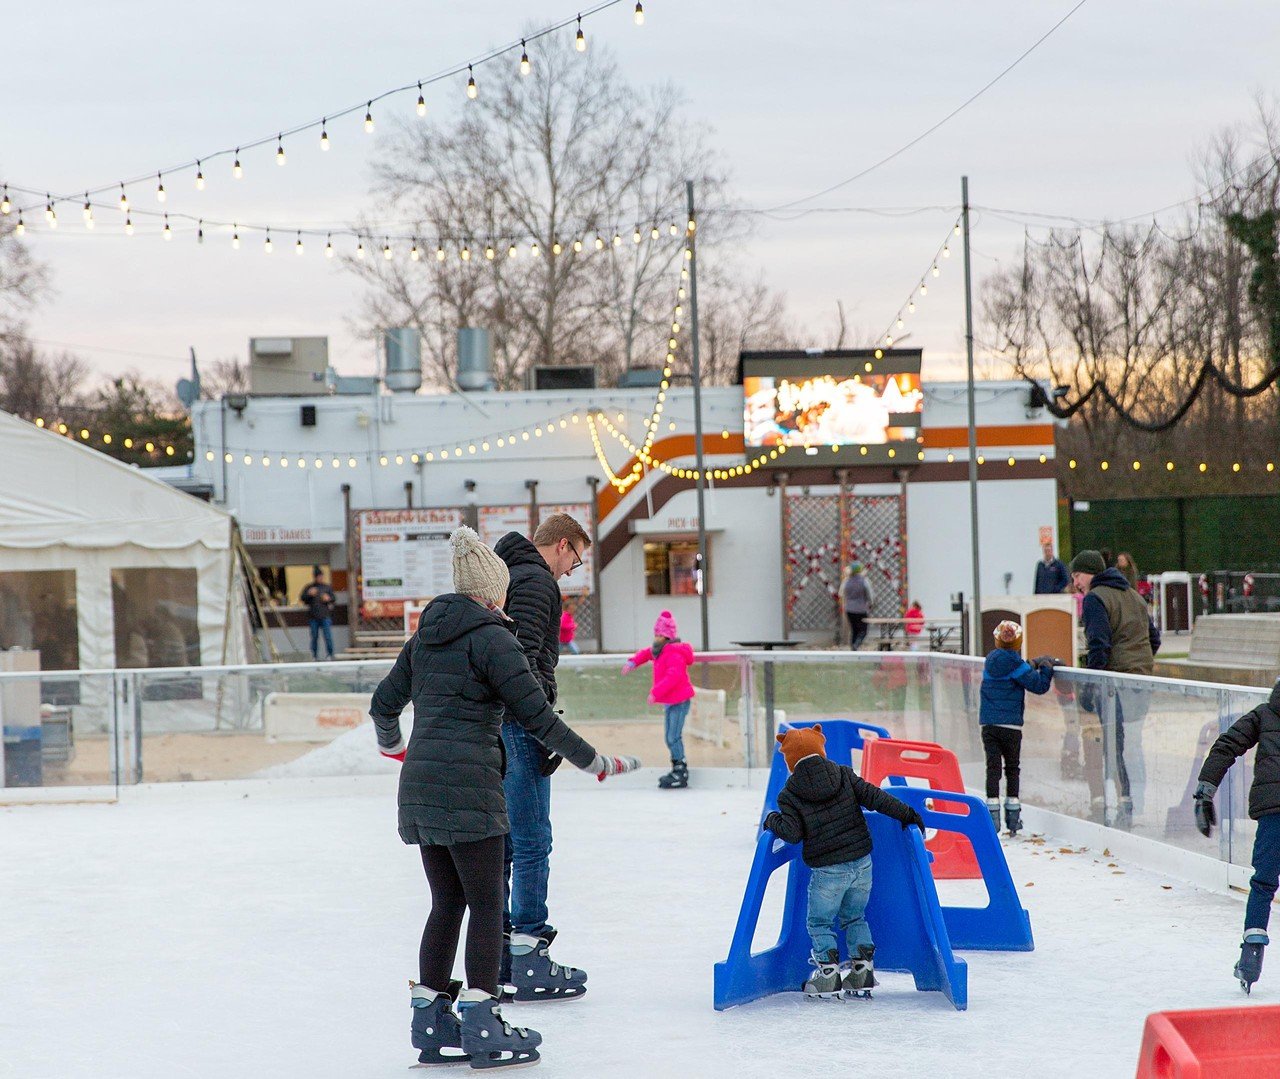 Fifty West Brewing Company Burger Bar
7605 Wooster Pike, Columbia Township
Fifty West is again transforming into a winter wonderland with their ice skating rink, fire pits and large heated tents. They’ve also got hot beverages (boozy and otherwise) to help chase away any winter blues.